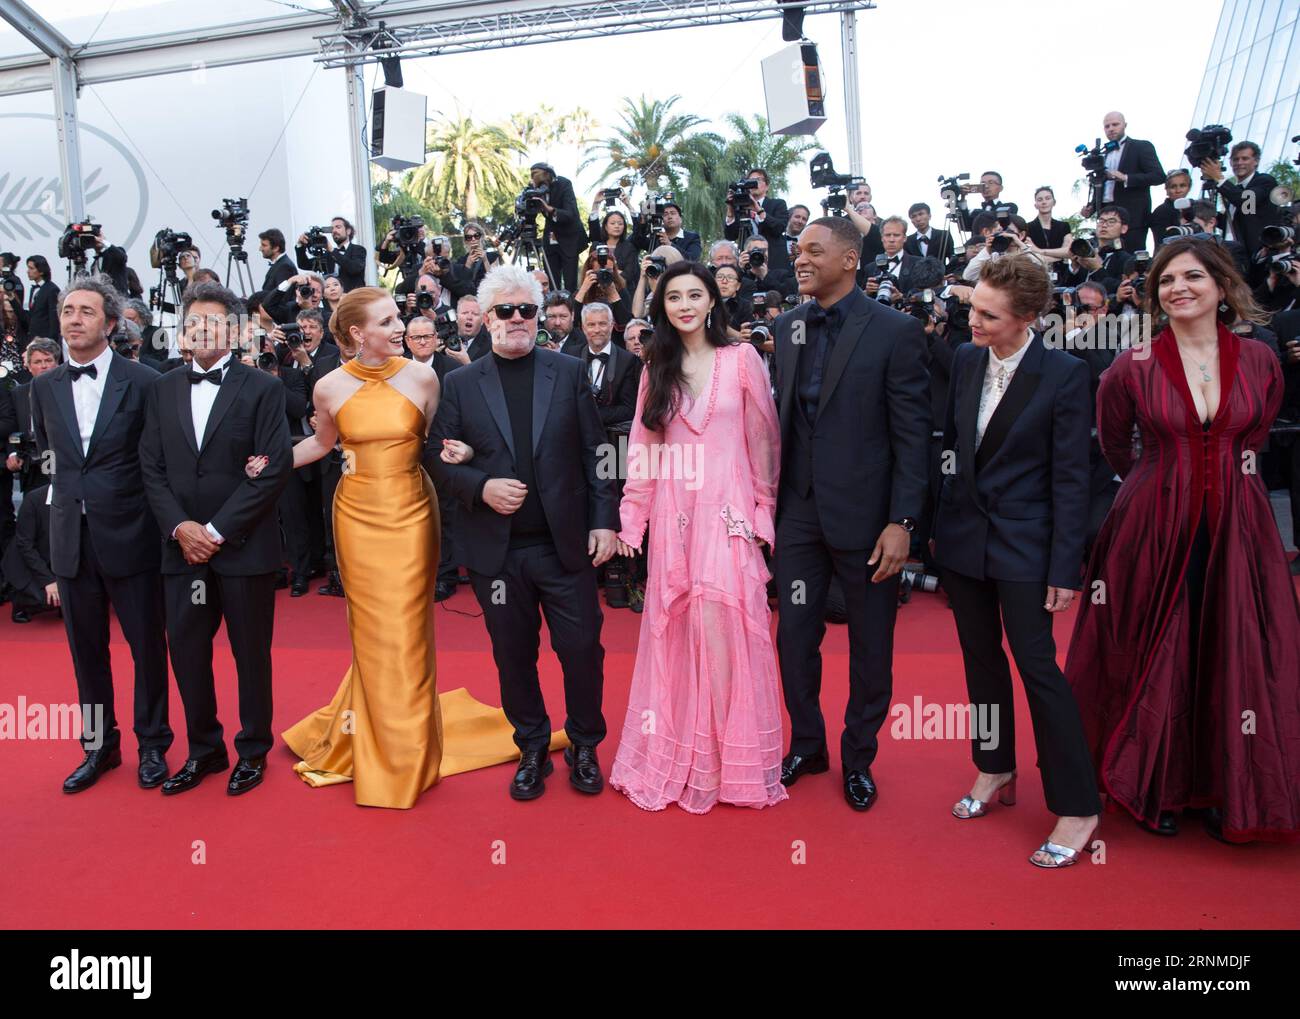 (170524) -- CANNES, May 24, 2017 -- Jury members of the 70th Cannes International Film Festival Agnes Jaoui, Maren Ade, Will Smith, Fan Bingbing, Pedro Almodovar, Jessica Chastain, Gabriel Yared, Paolo Sorrentino (R-L) attend the 70th Anniversary ceremony of the Cannes Film Festival in Cannes, France, May 23, 2017. ) (jmmn) FRANCE-CANNES-FILM FESTIVAL-70TH ANNIVERSARY-RED CARPET XuxJinquan PUBLICATIONxNOTxINxCHN   Cannes May 24 2017 Jury Members of The 70th Cannes International Film Festival Agnes Jaoui Maren ADE will Smith supporter Bing Bing Pedro Almodovar Jessica Chastain Gabriel Yared Pao Stock Photo